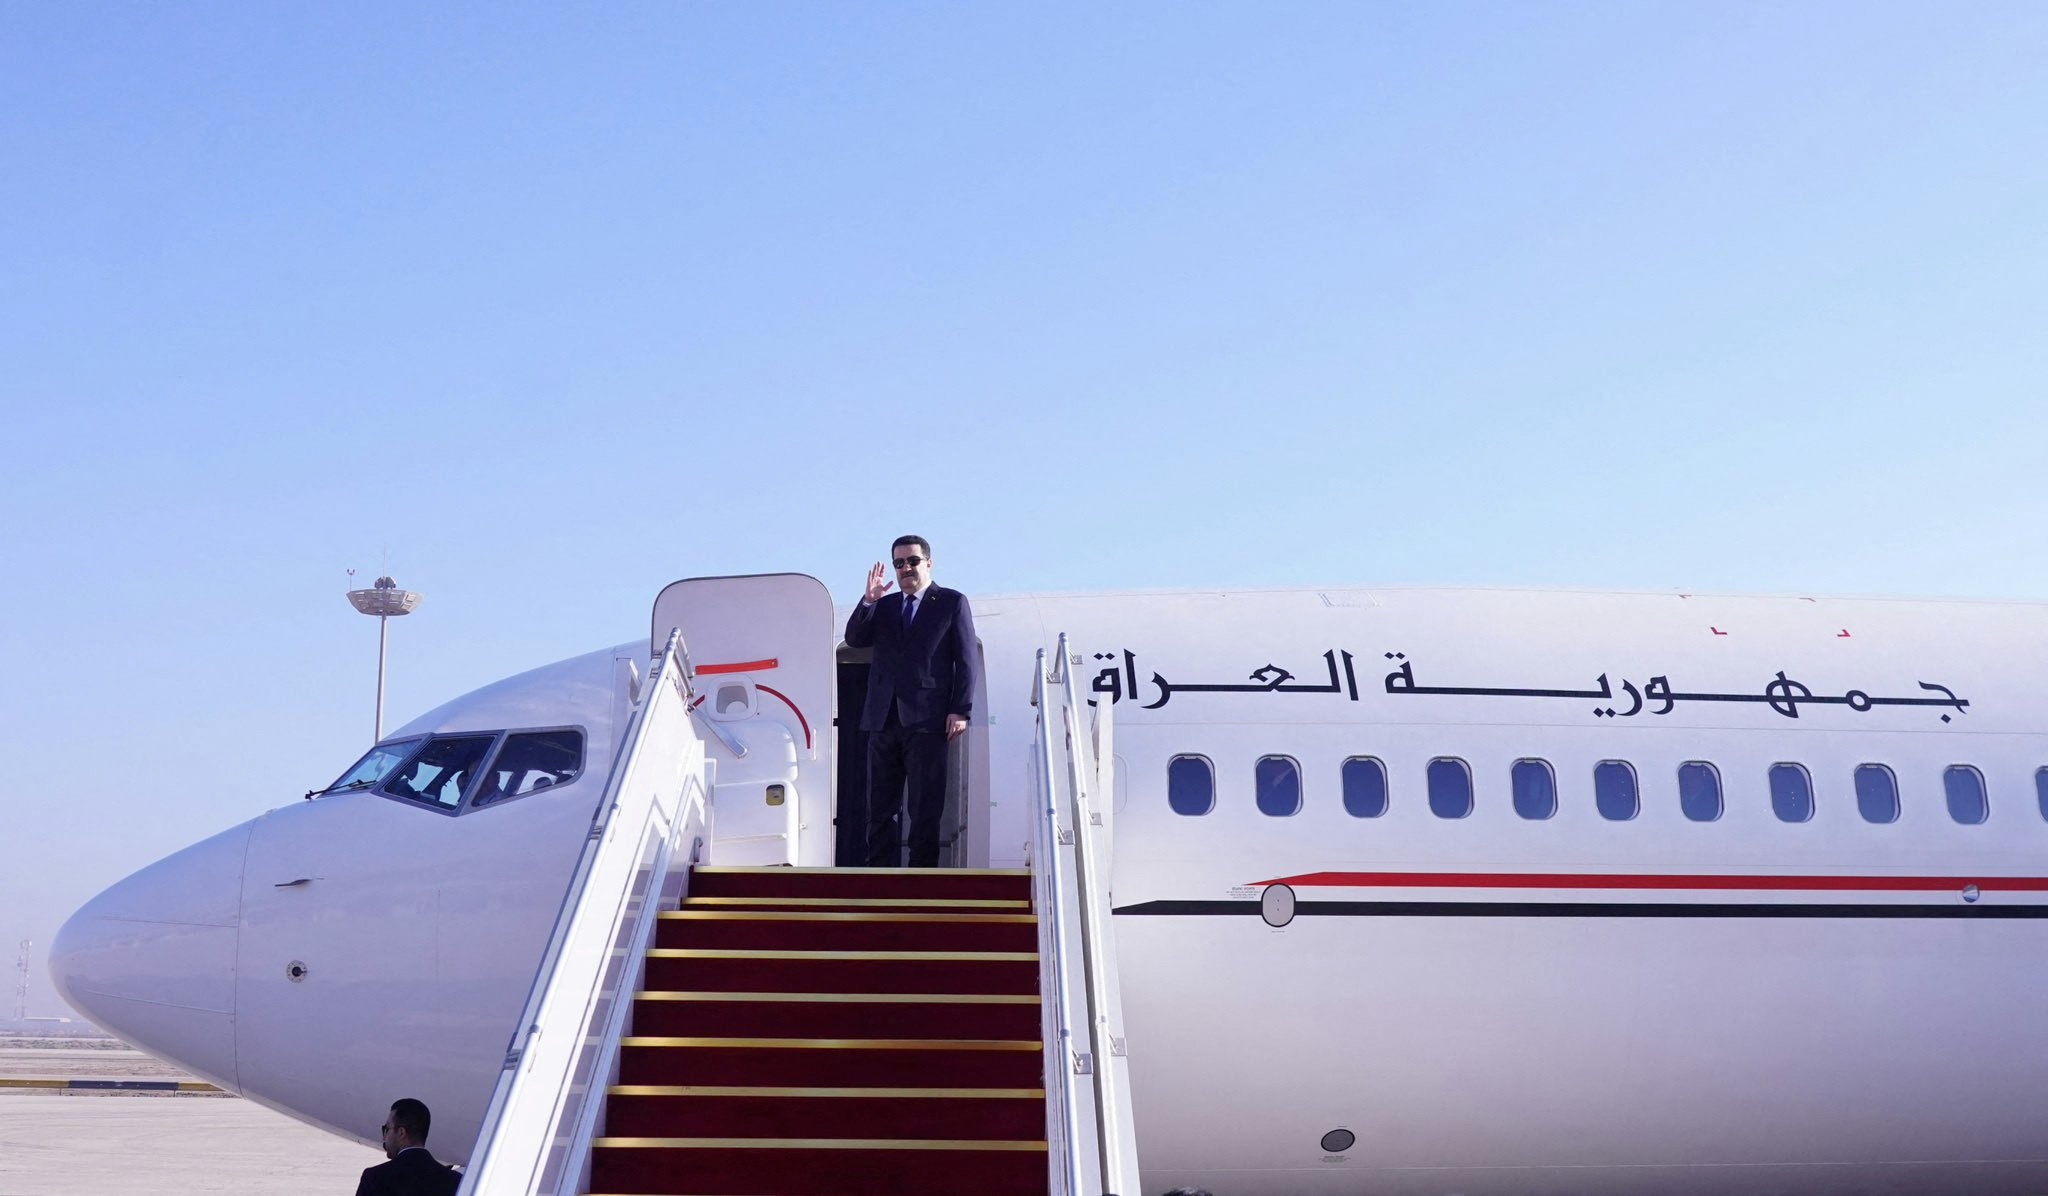 Iraqi Prime Minister Mohammed Shia al-Sudani boards a plane as he leaves for second Iraq conference in Amman, in Baghdad